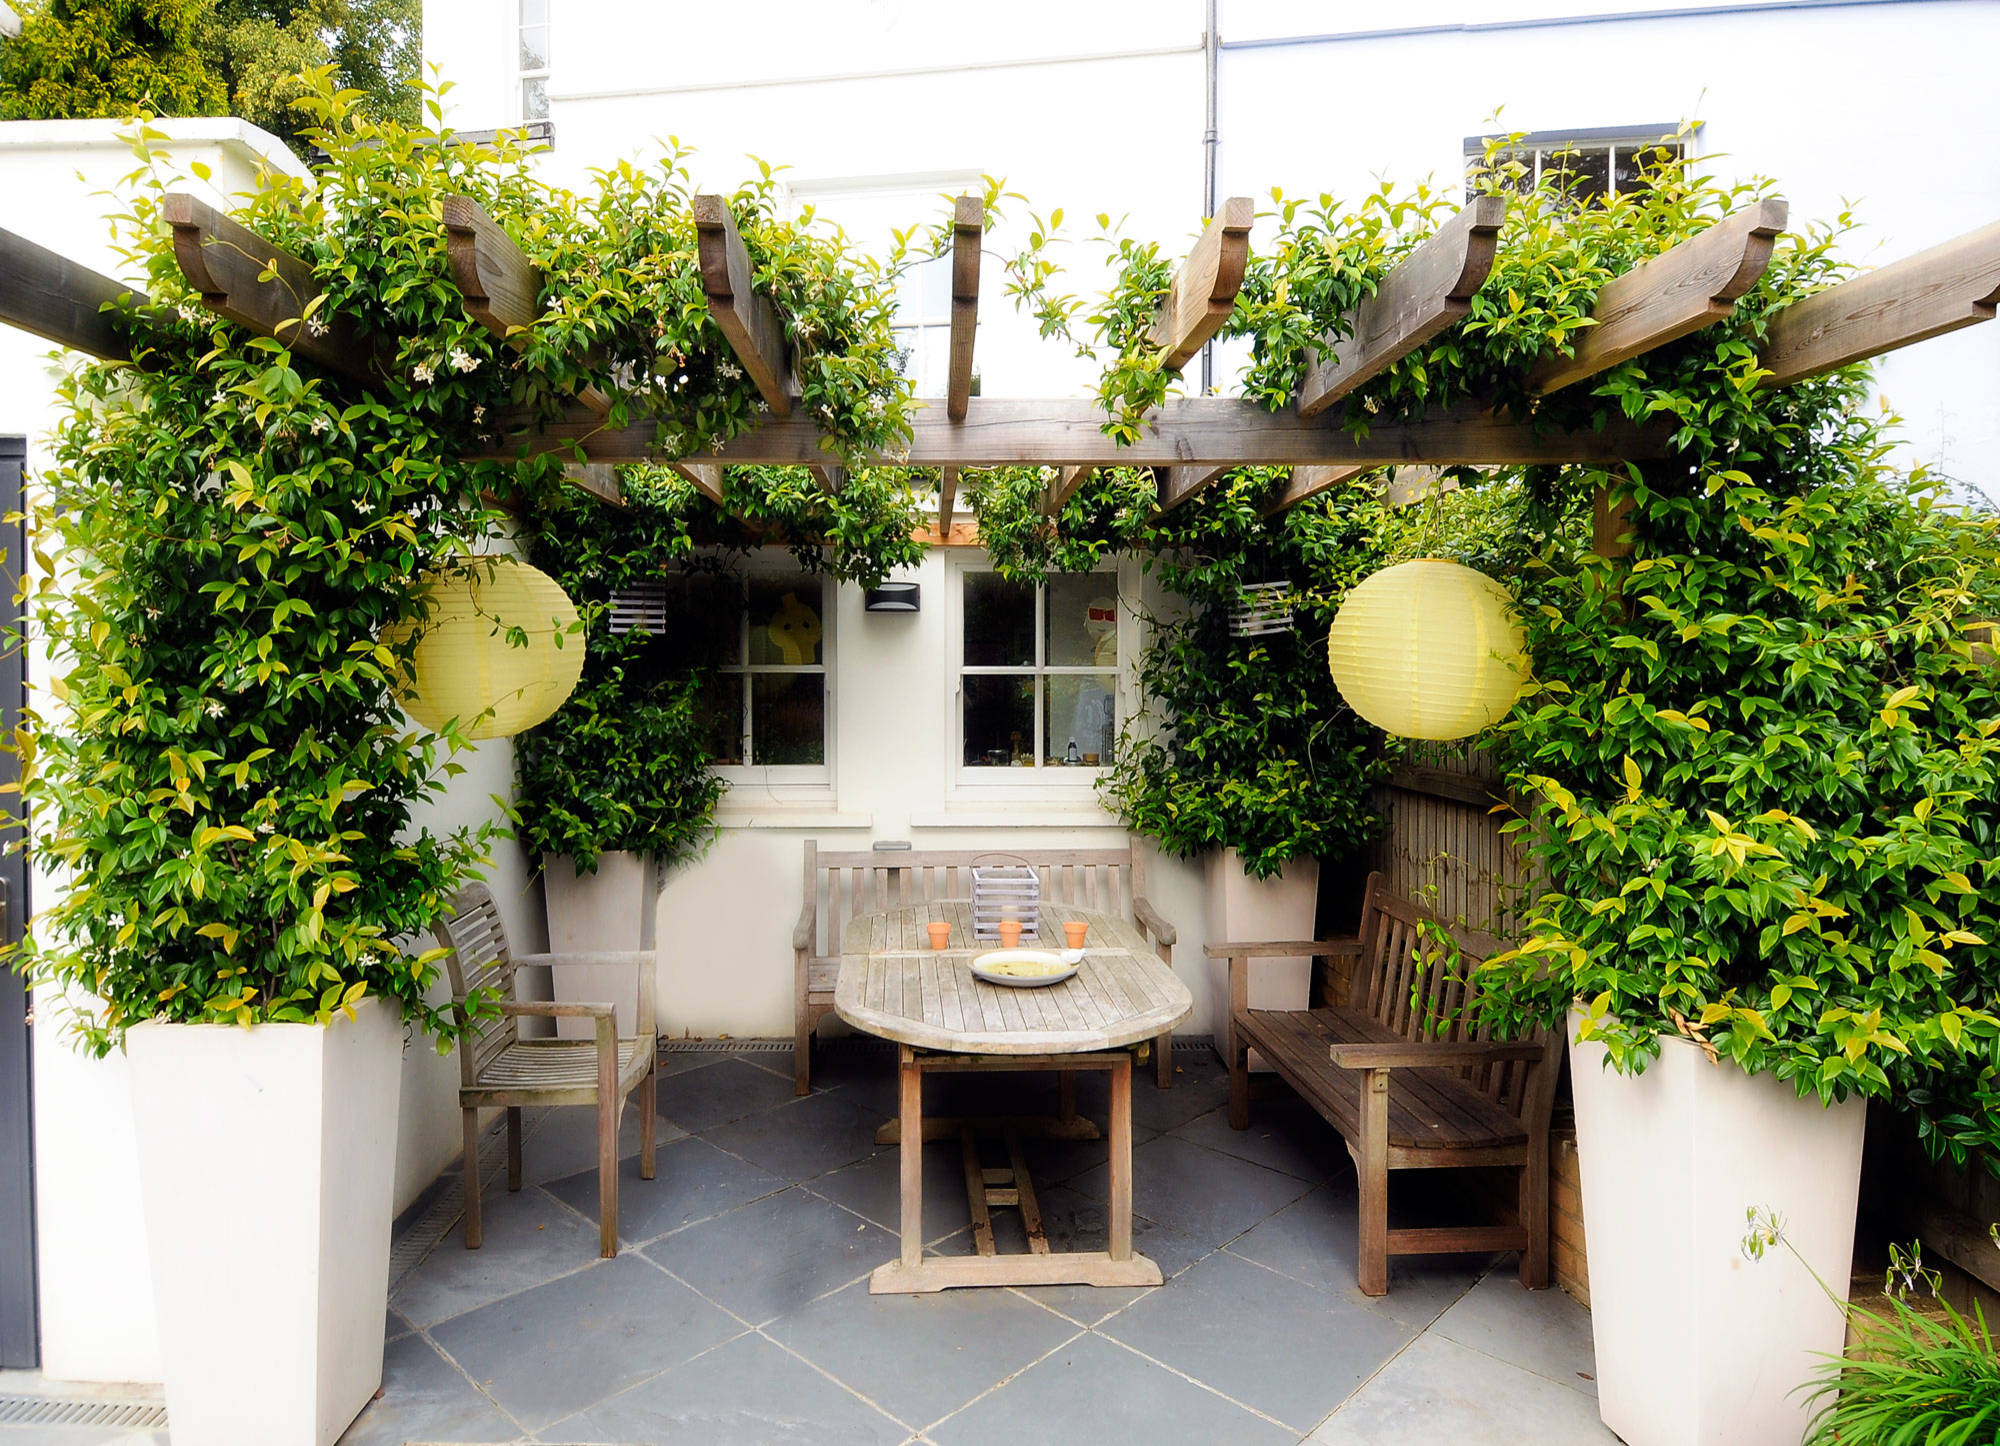 75 Small Patio with a Pergola Ideas You'll Love - December, 2023 | Houzz